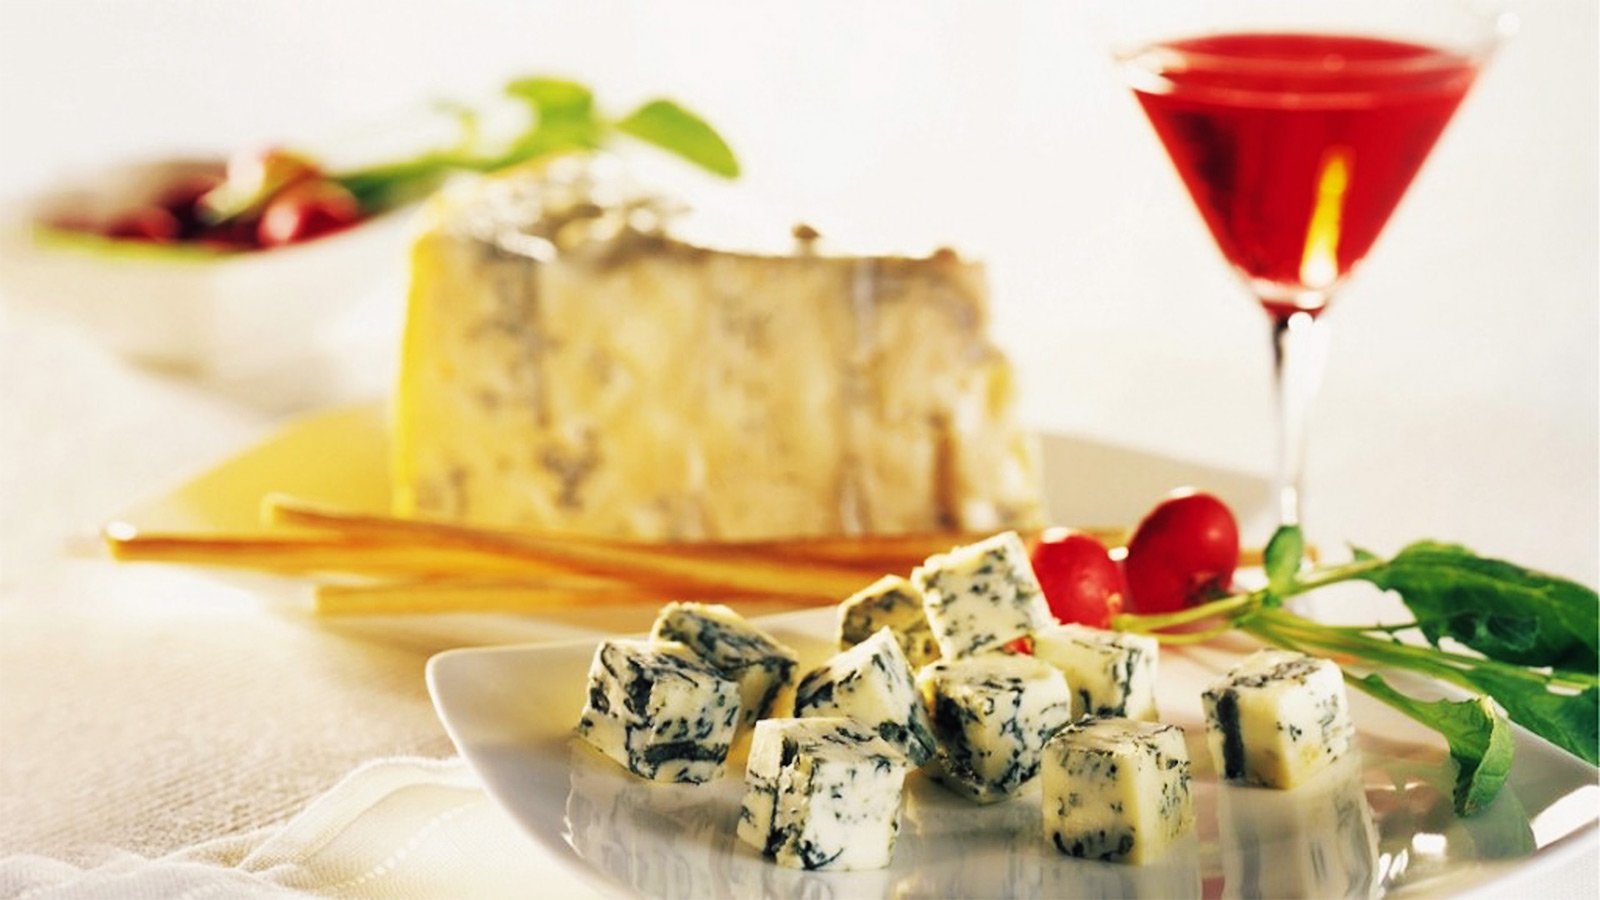 How to try Gorgonzola in Milan